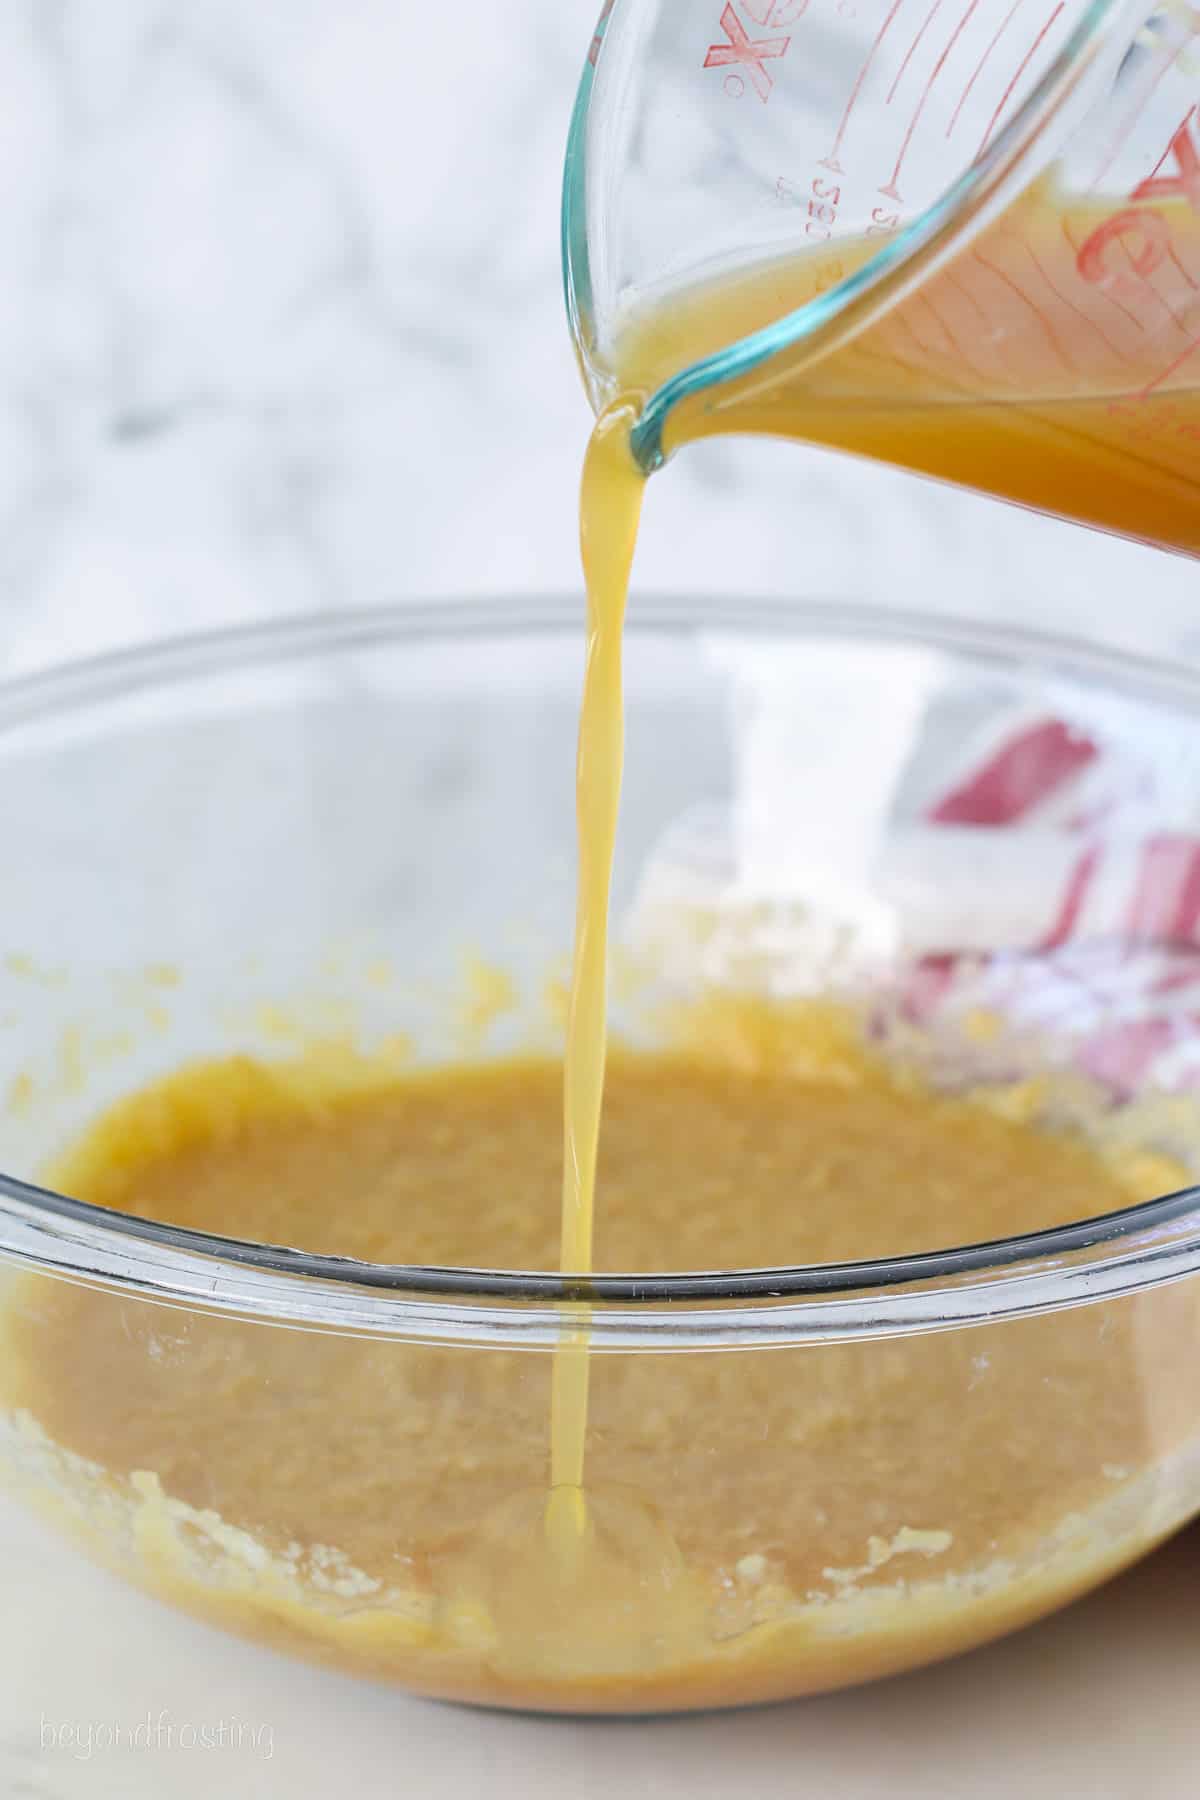 Boiled cider is poured into a glass mixing bowl with wet batter ingredients.